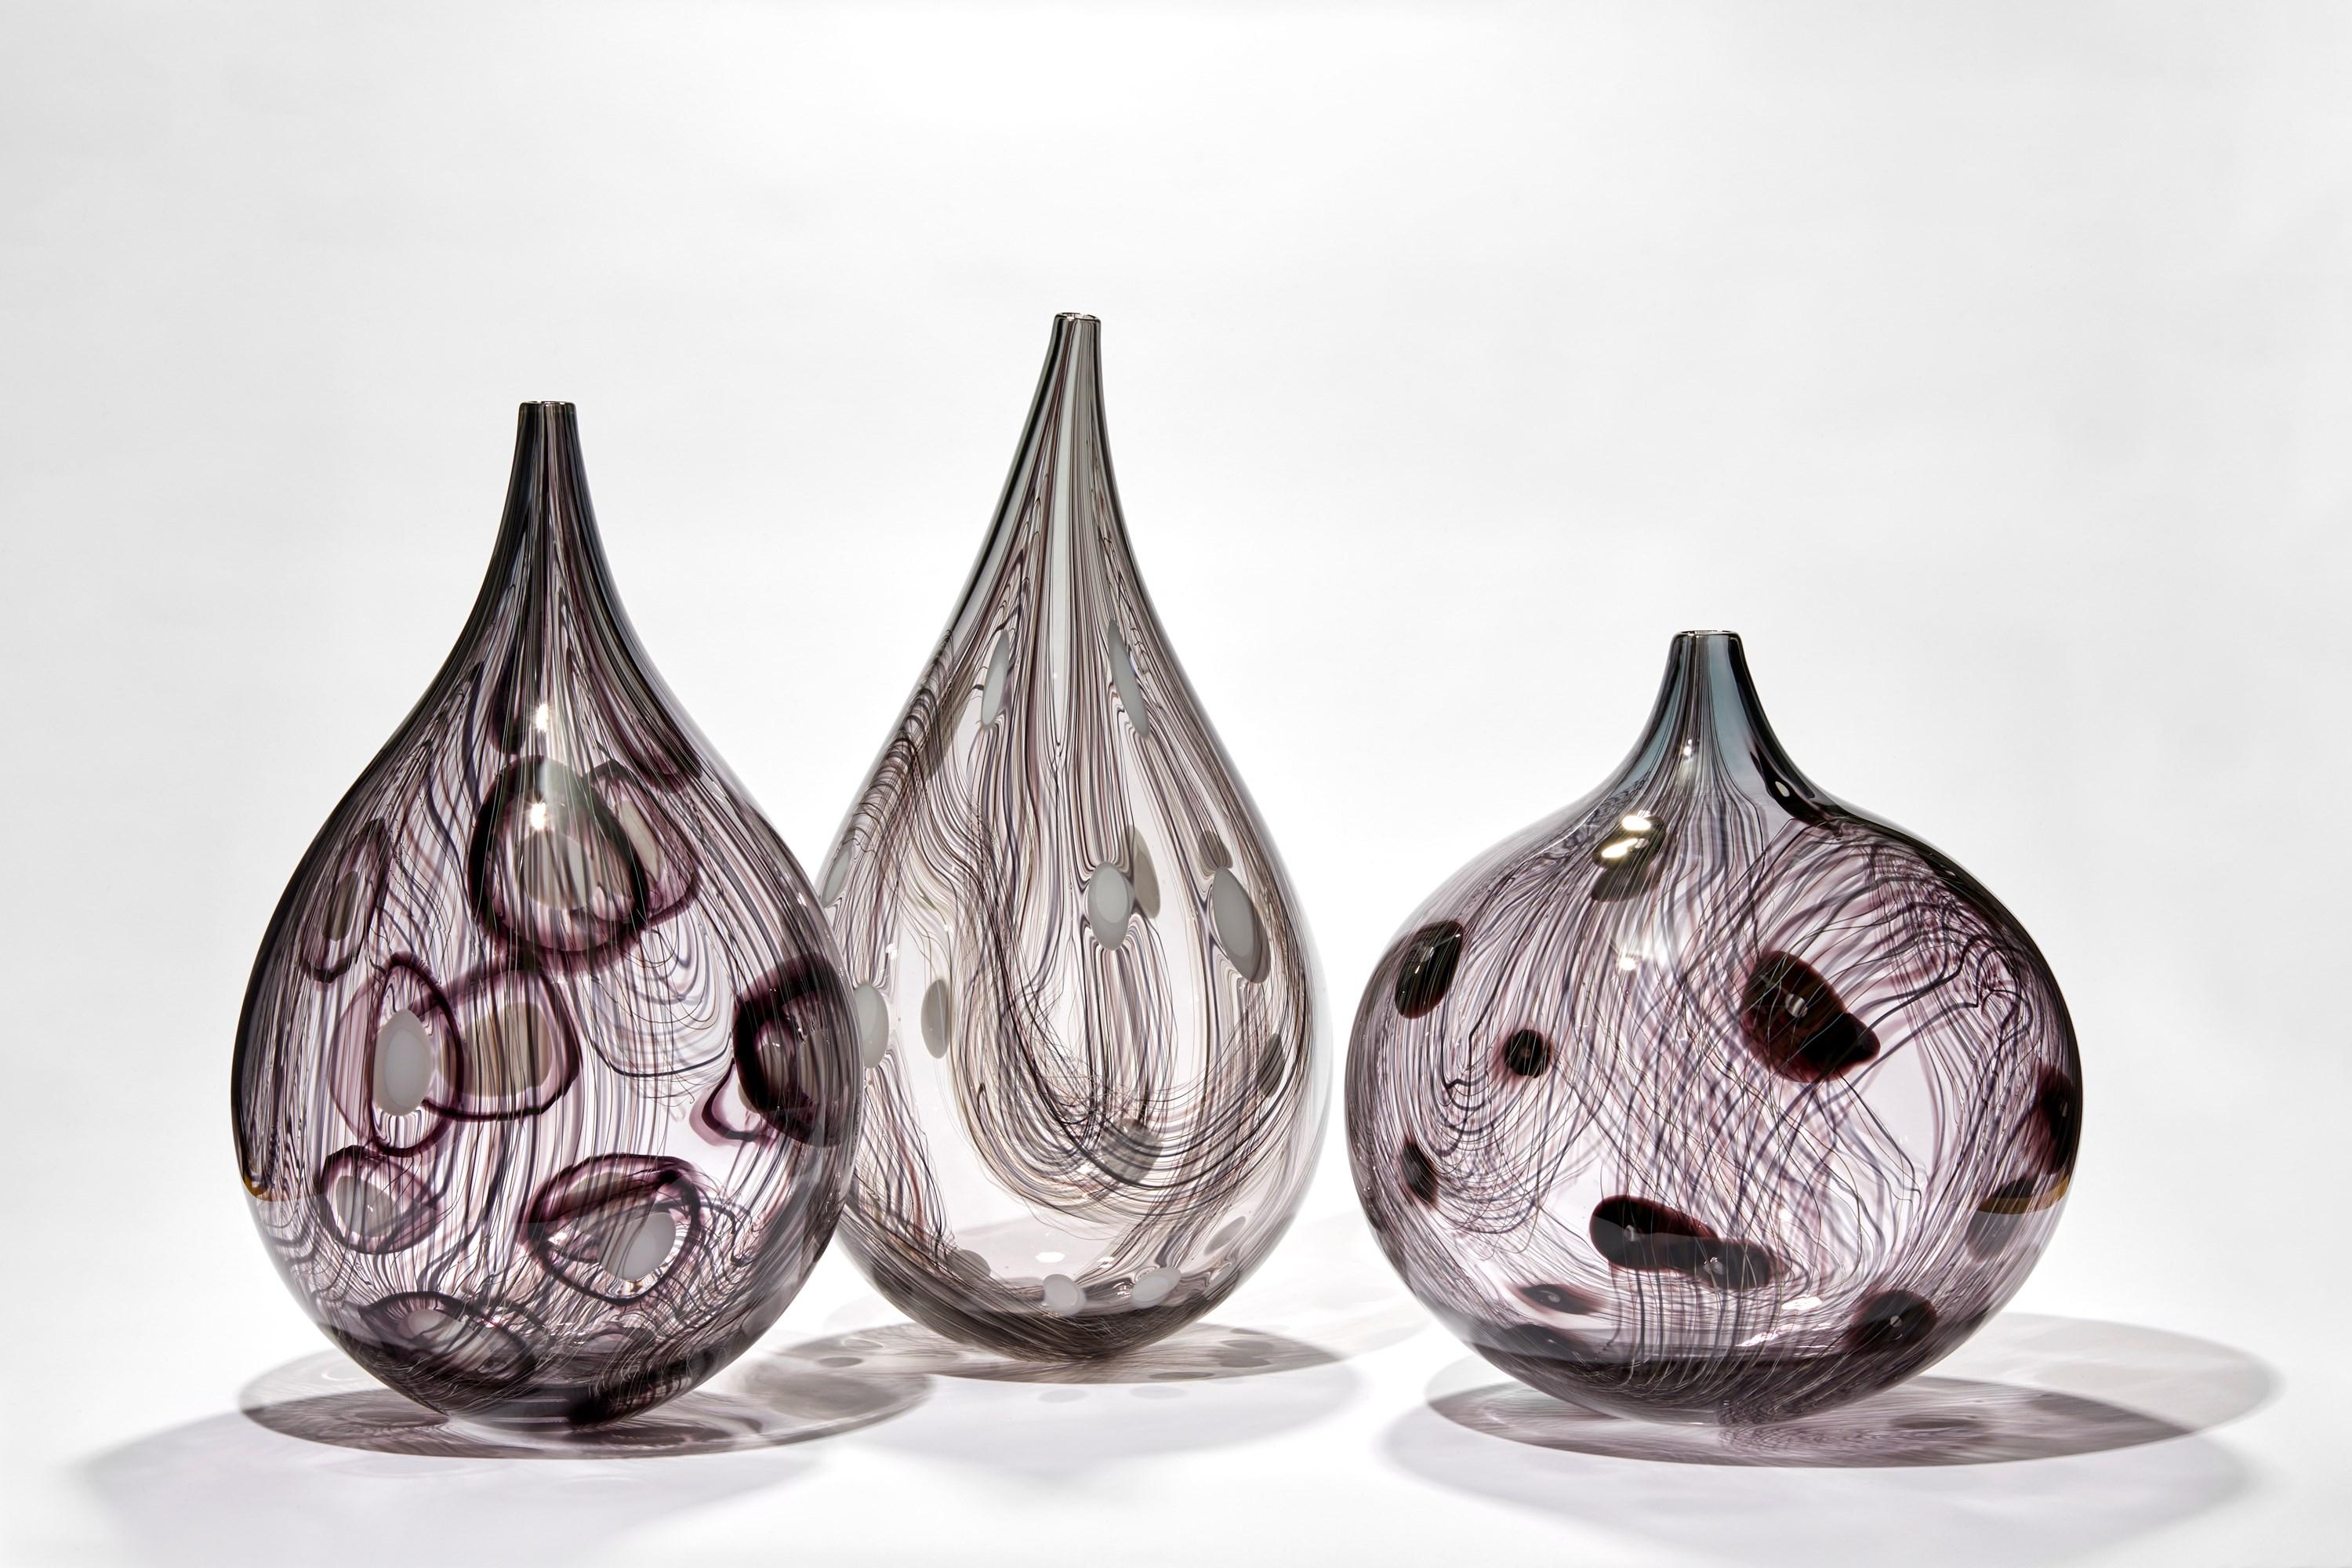 Rings iv, a Black / Aubergine & Clear Sculptural Glass Vessel by Ann Wåhlström In New Condition For Sale In London, GB